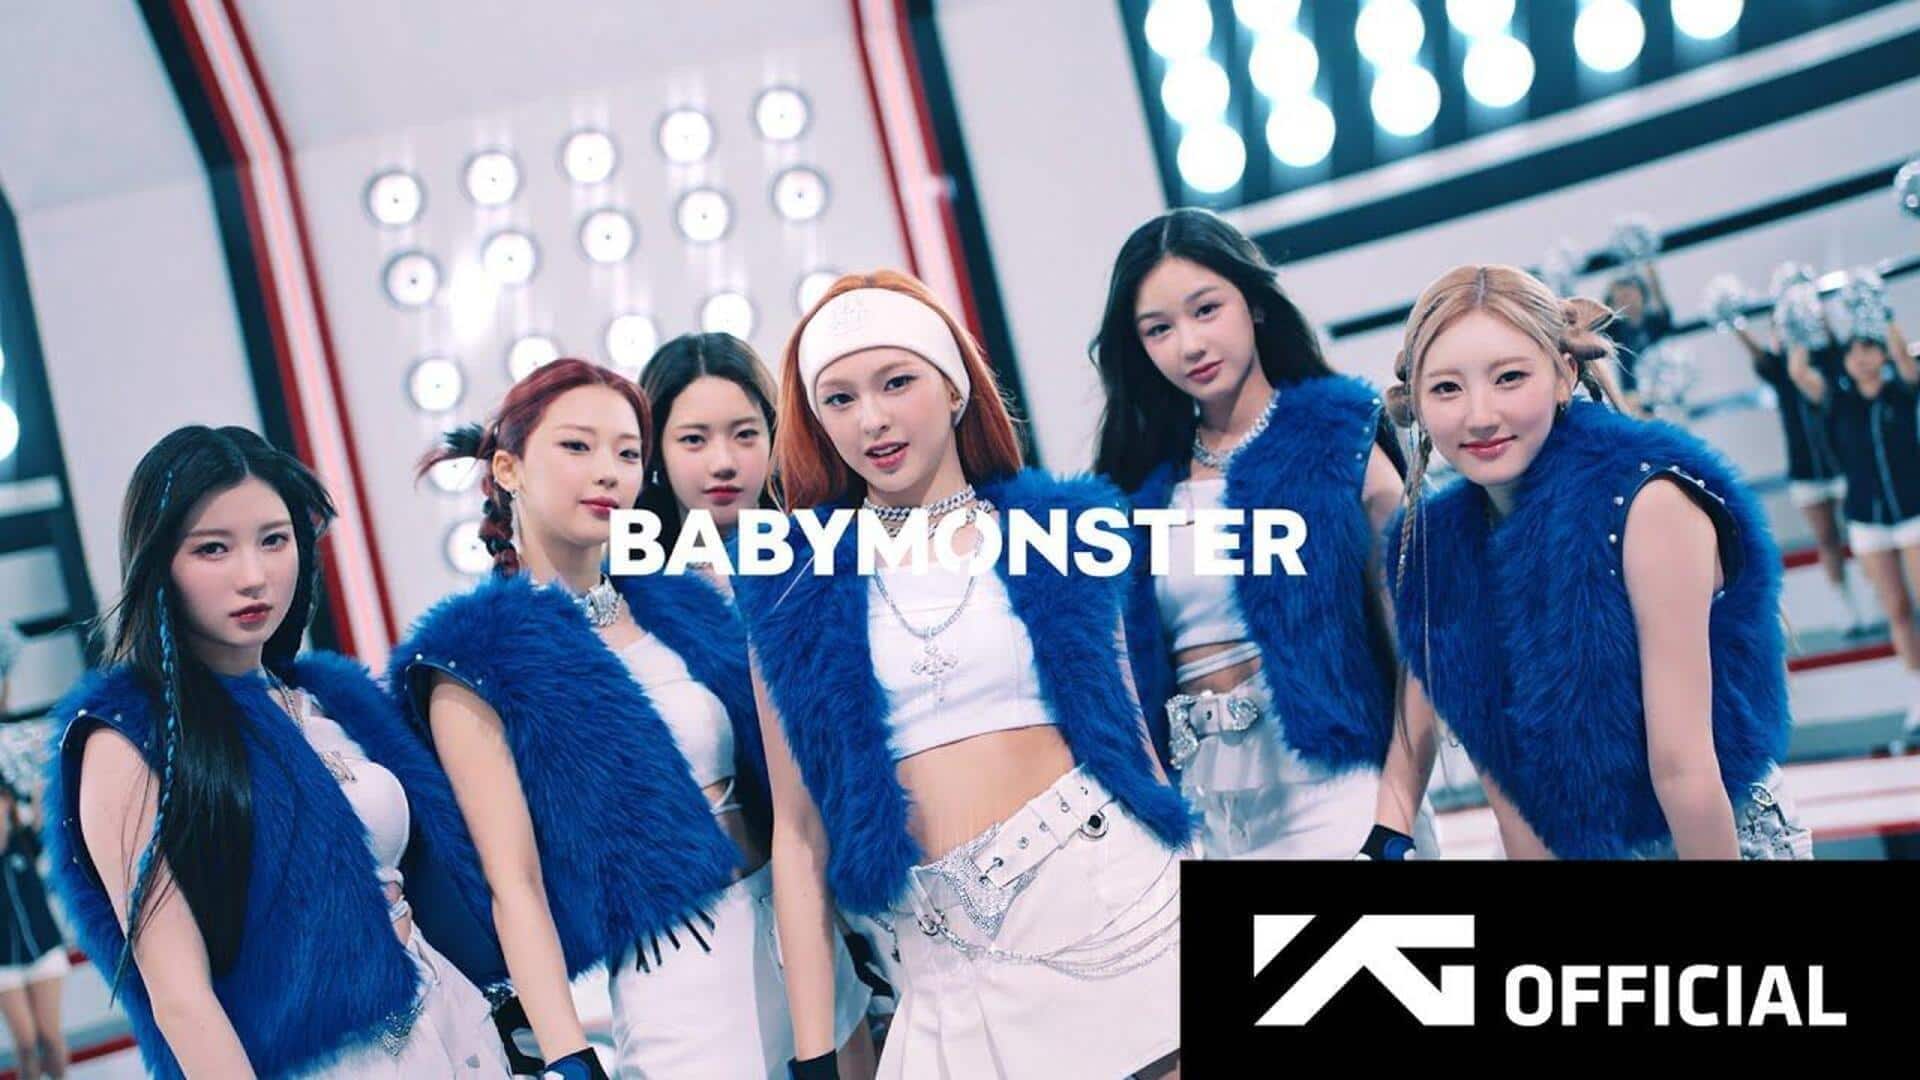 BABYMONSTER announces fanmeet tour ahead of 'BABYMONS7ER' release; cities unveiled